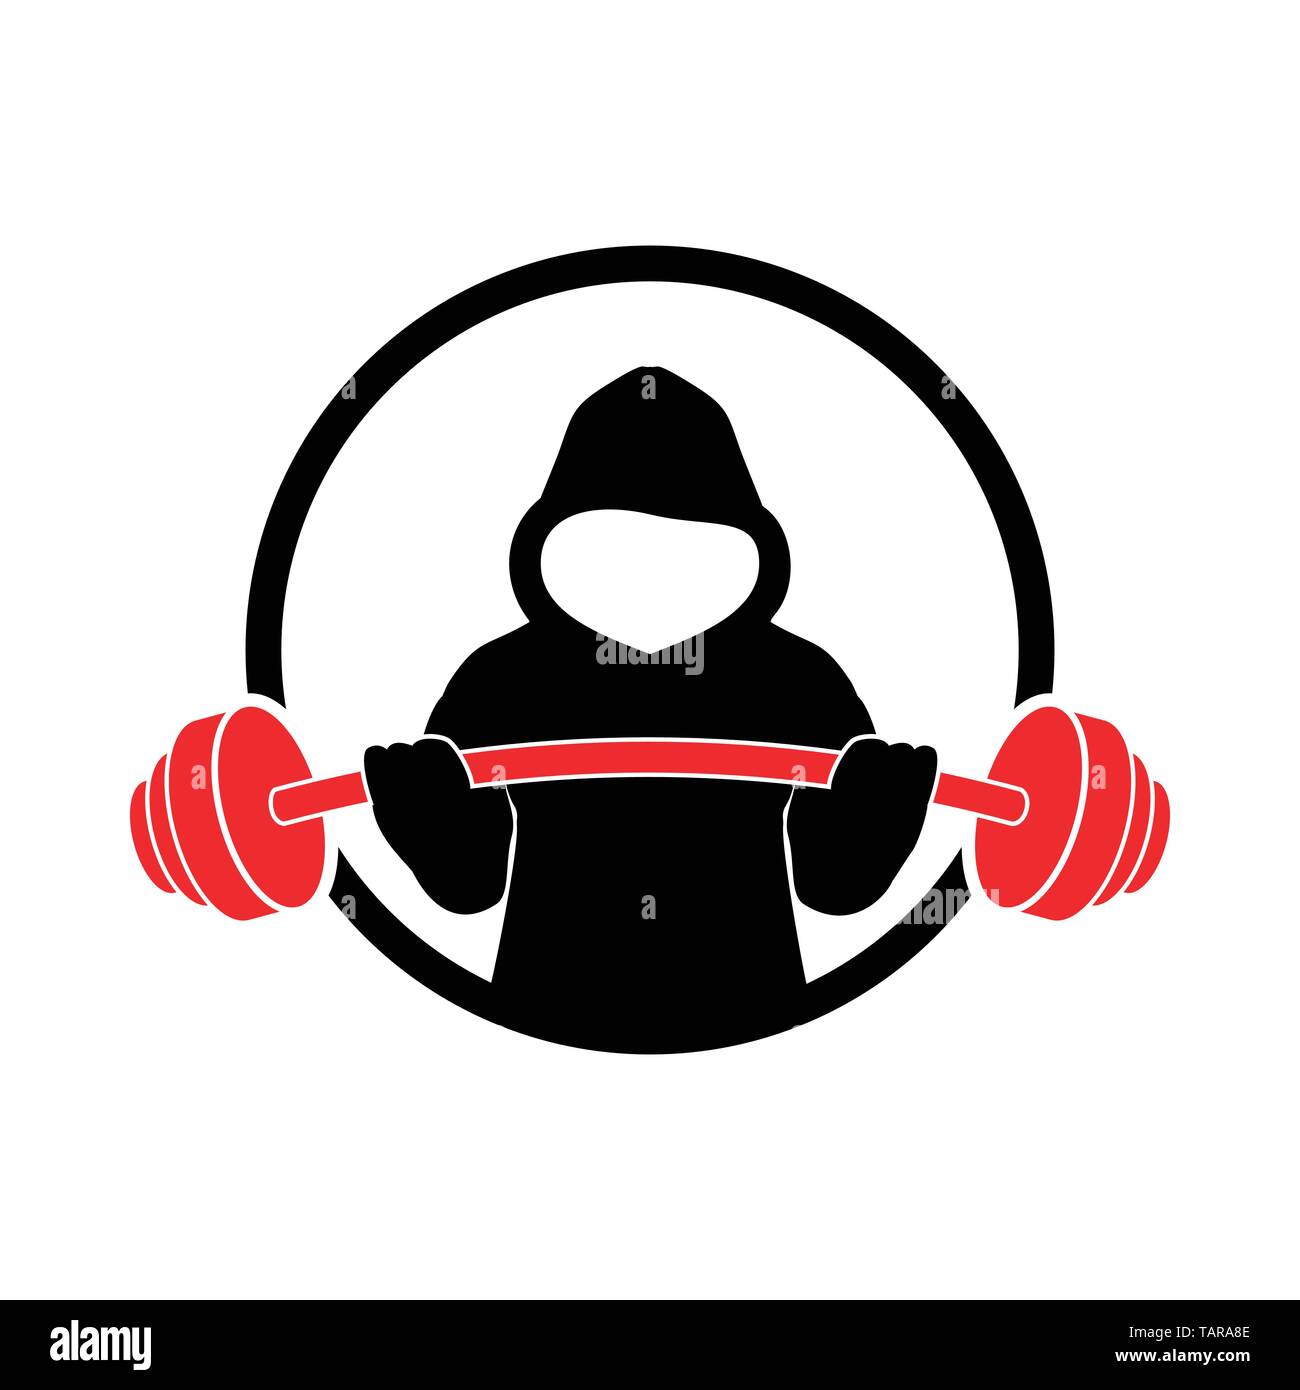 Hoodie Fitness Strength Gym Vector Illustration Symbol Graphic Logo Design Template Stock Vector